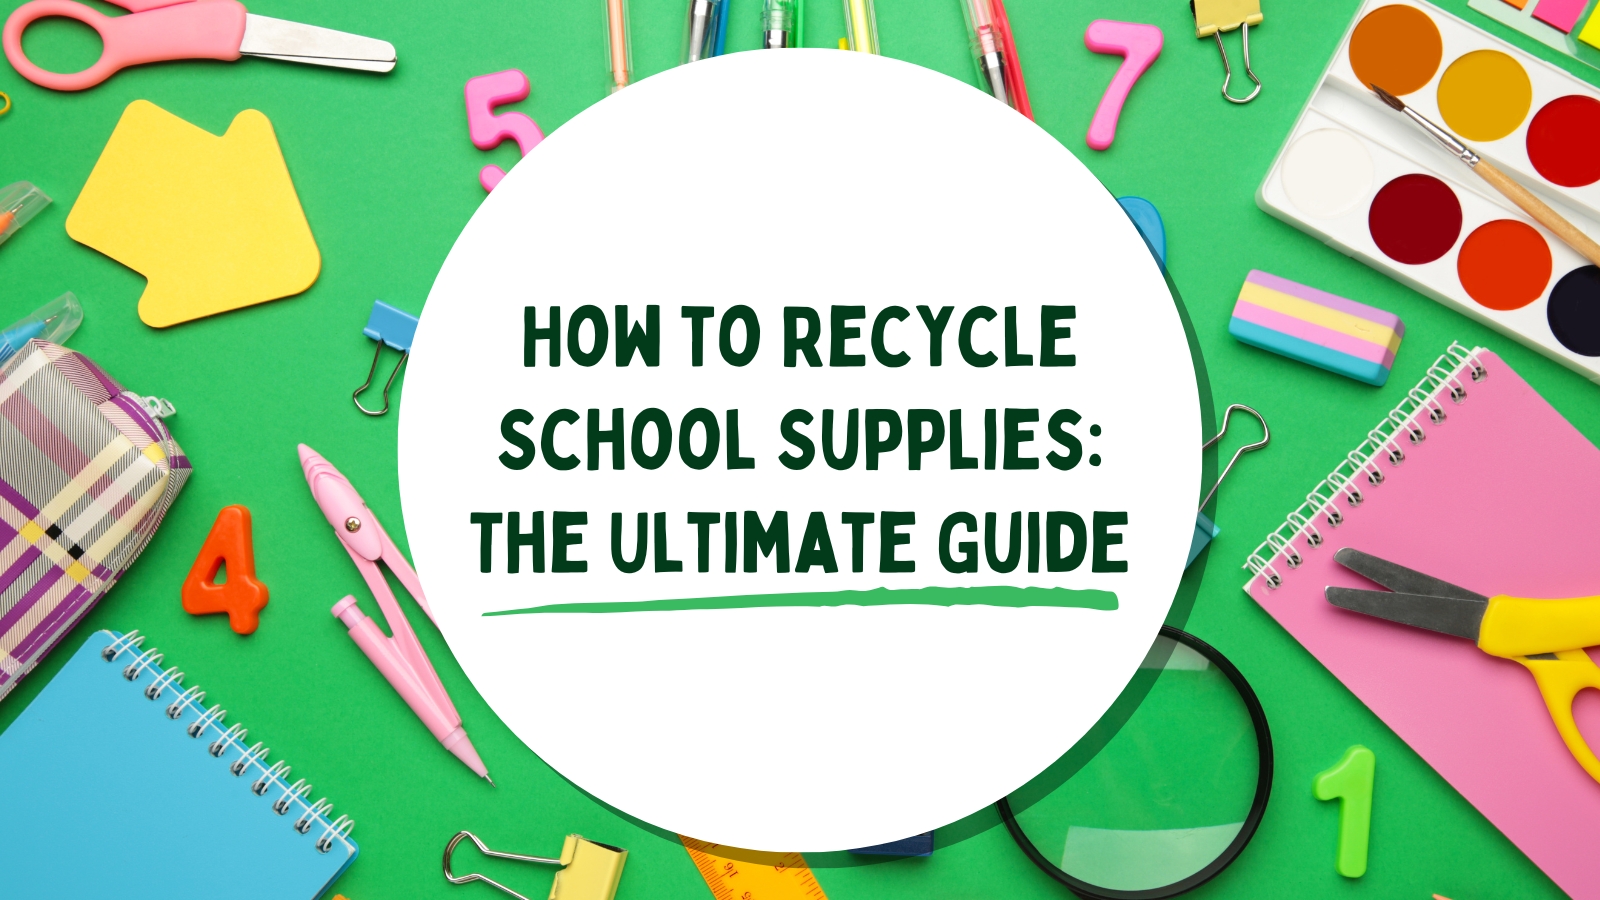 How To Recycle School Supplies: The Ultimate Guide [Video]